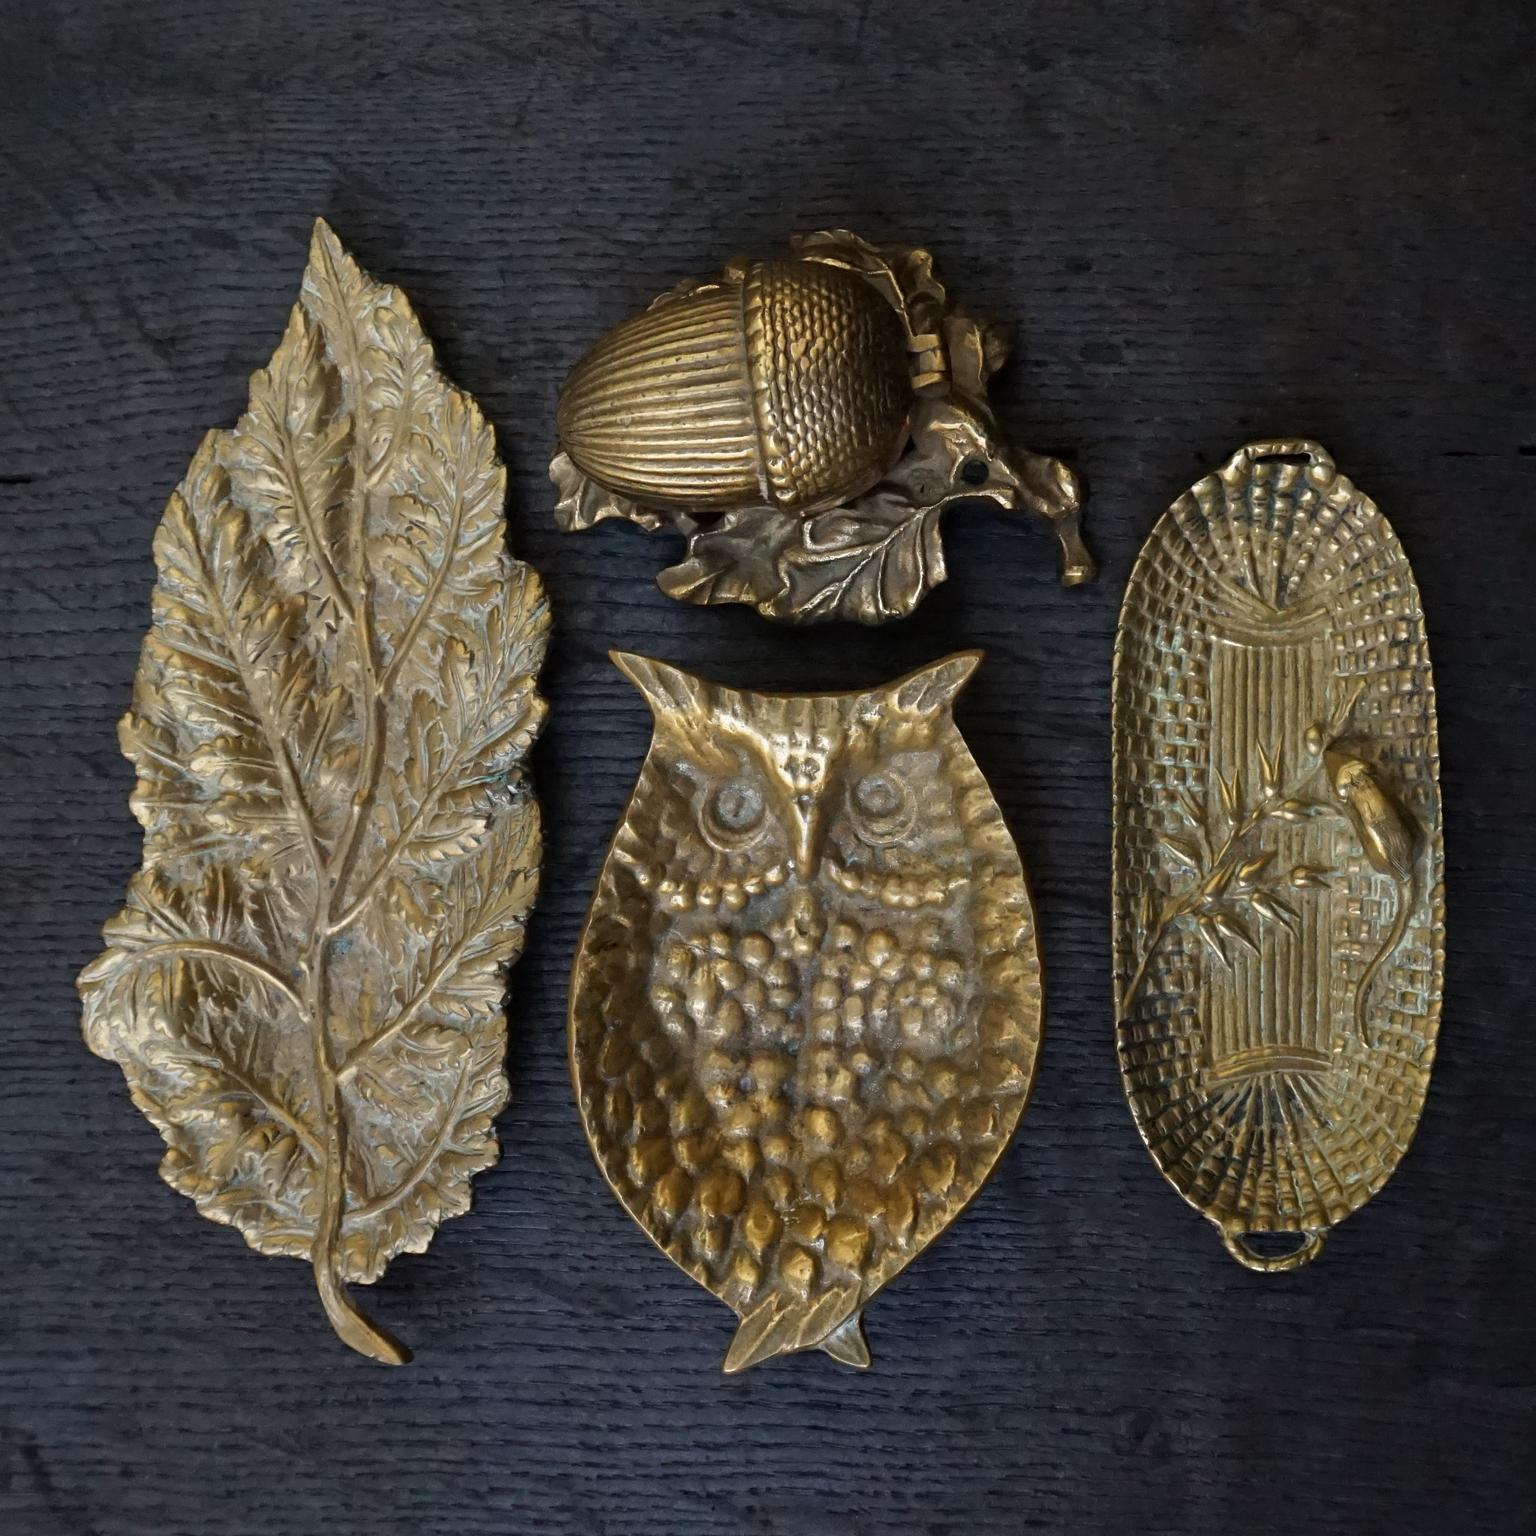 Decorative collection of four little brass vide-poche trinket dishes from the 1960s to keep or collect your little trinkets in.

Use them to put your jewelry in on your nightstand before going to bed.
Or on your hallway table for your keys.
But